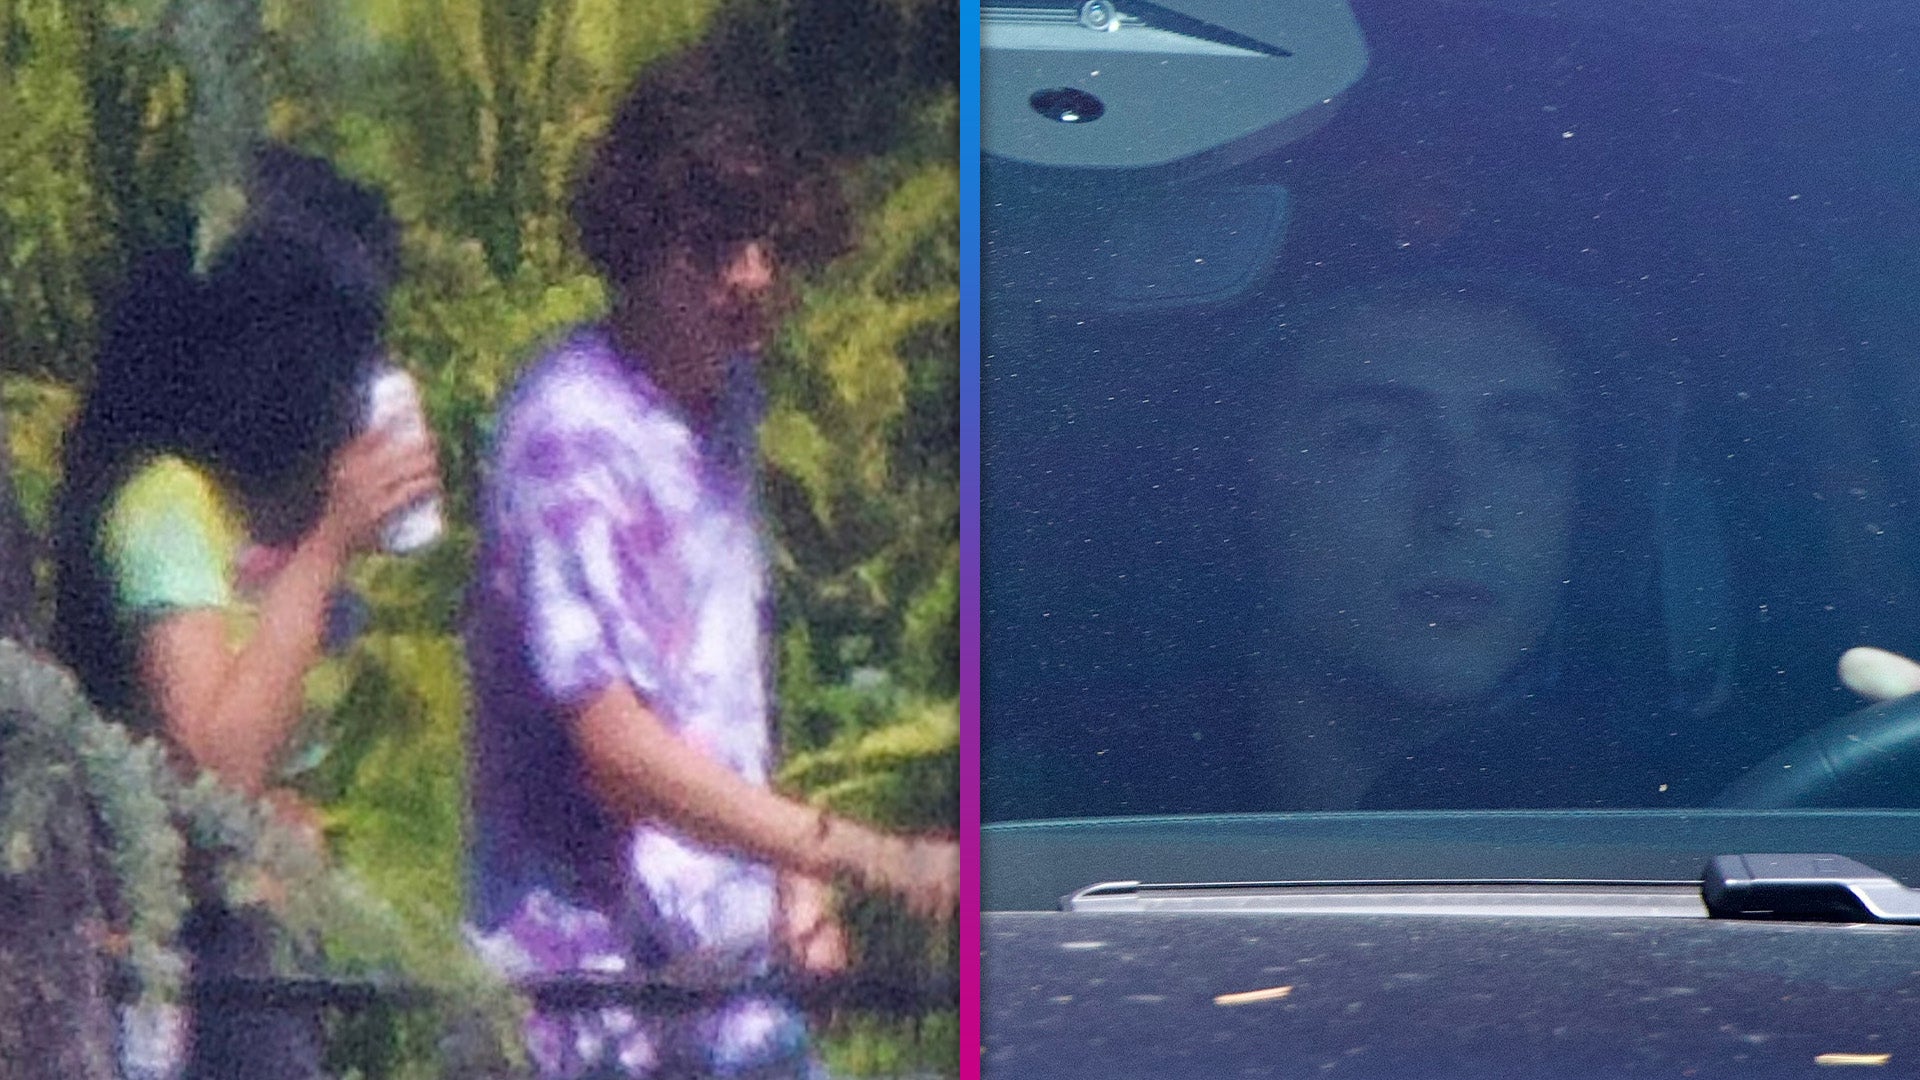 Kylie Jenner and Timothée Chalamet Spotted Together at His Home Amid Romance Rumors